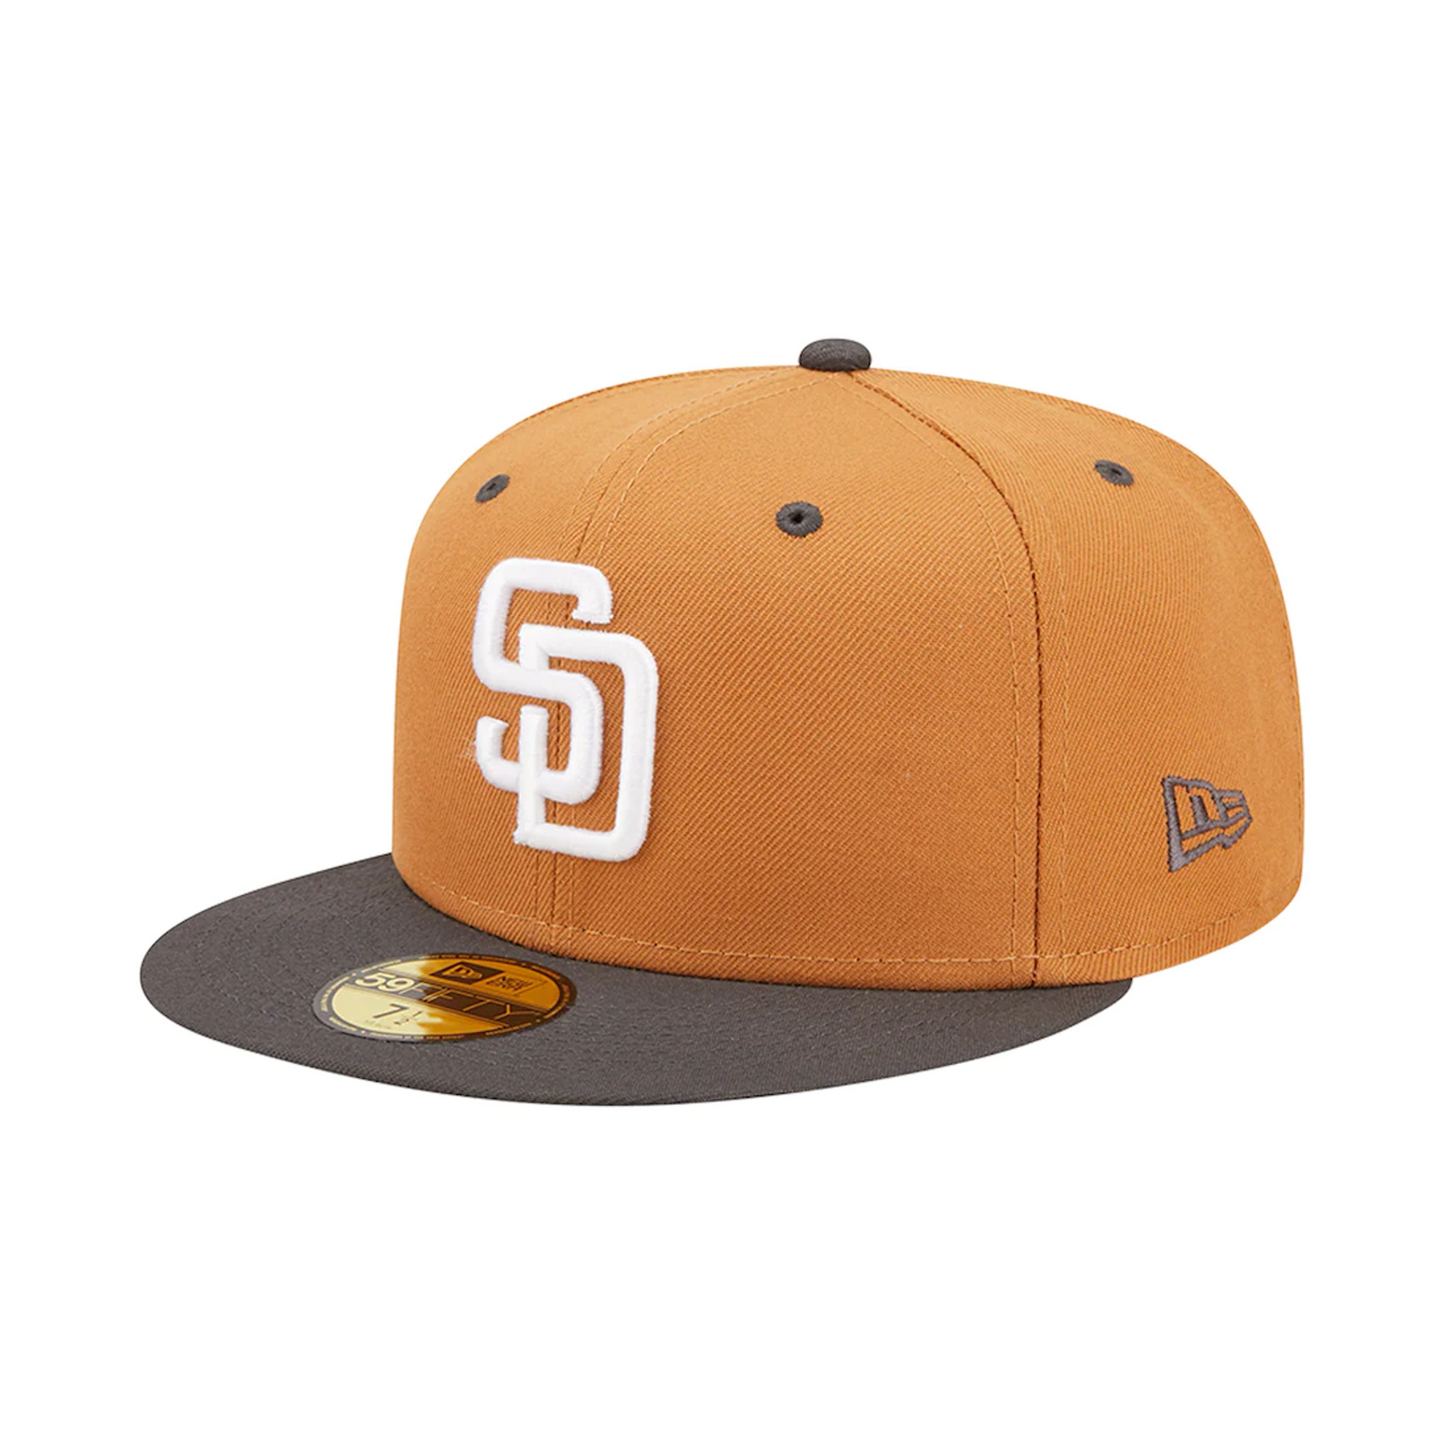 CASQUETTE 9FIFTY MLB COLOR PACK 2 TONS BRUN/CHARCOAL PADRES